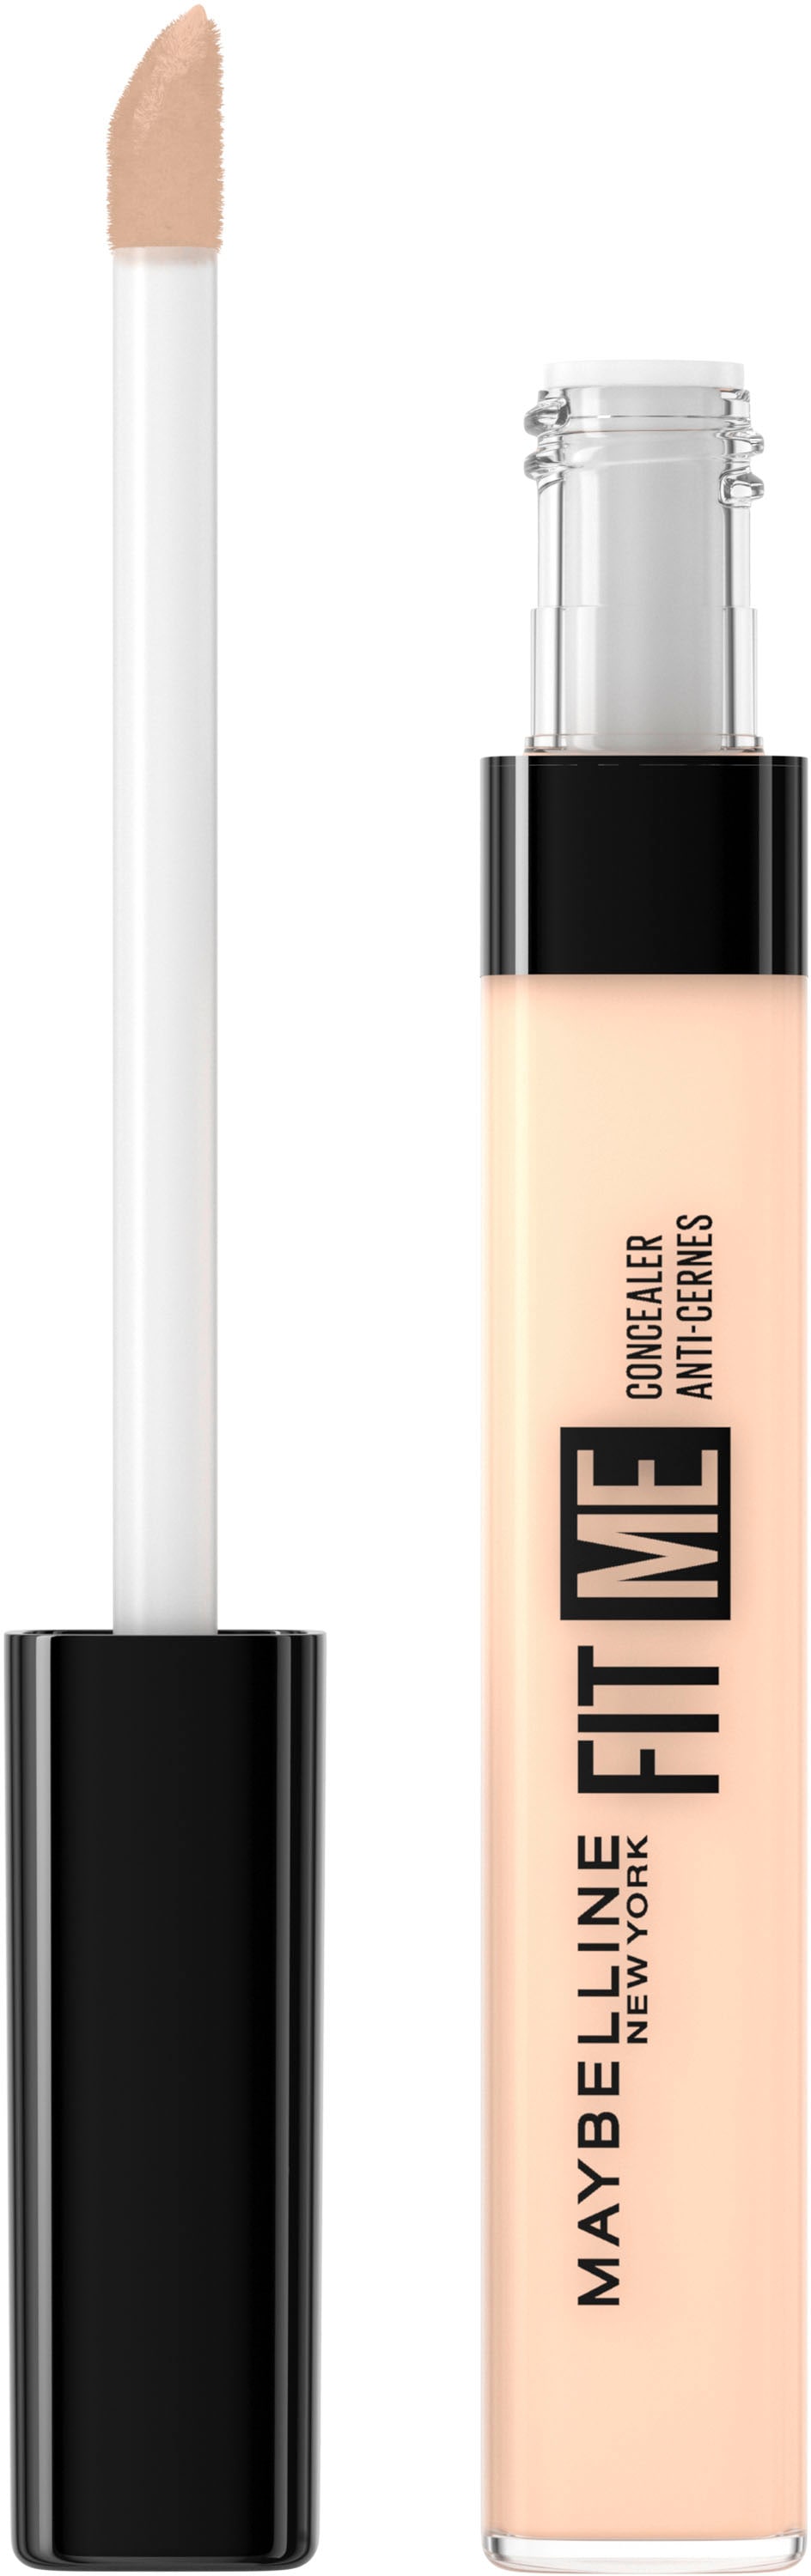 MAYBELLINE »FIT NEW ME« ♕ Concealer YORK bei